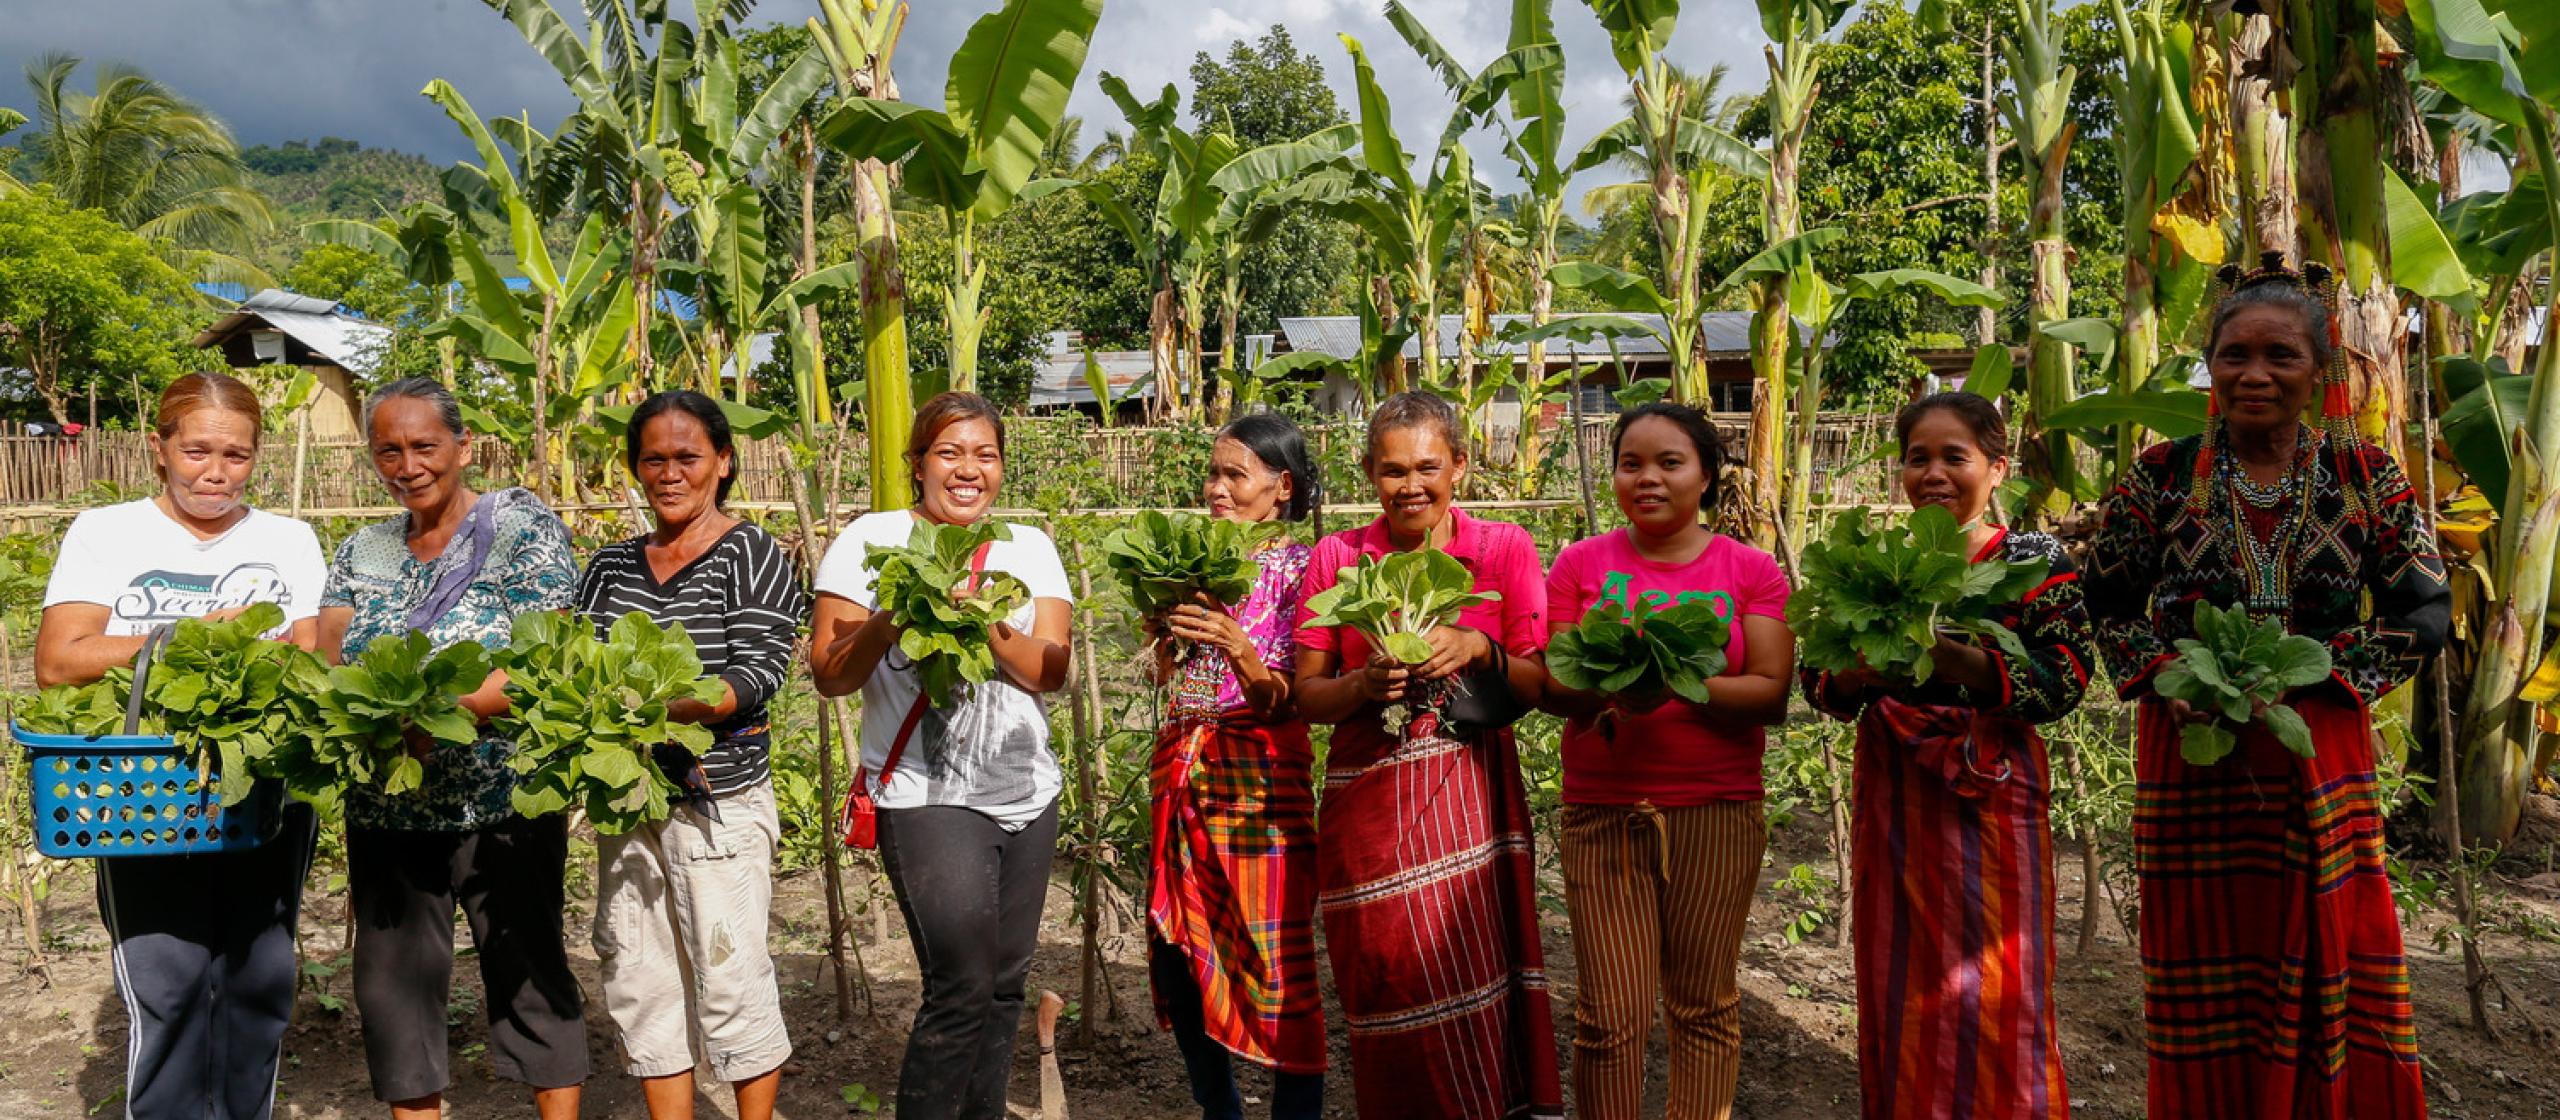  Women show the vegetables they harvest from their community garden in Paraiso village in Koronadal City in the Southern Philippine Province of South Cotabato, Mindanao